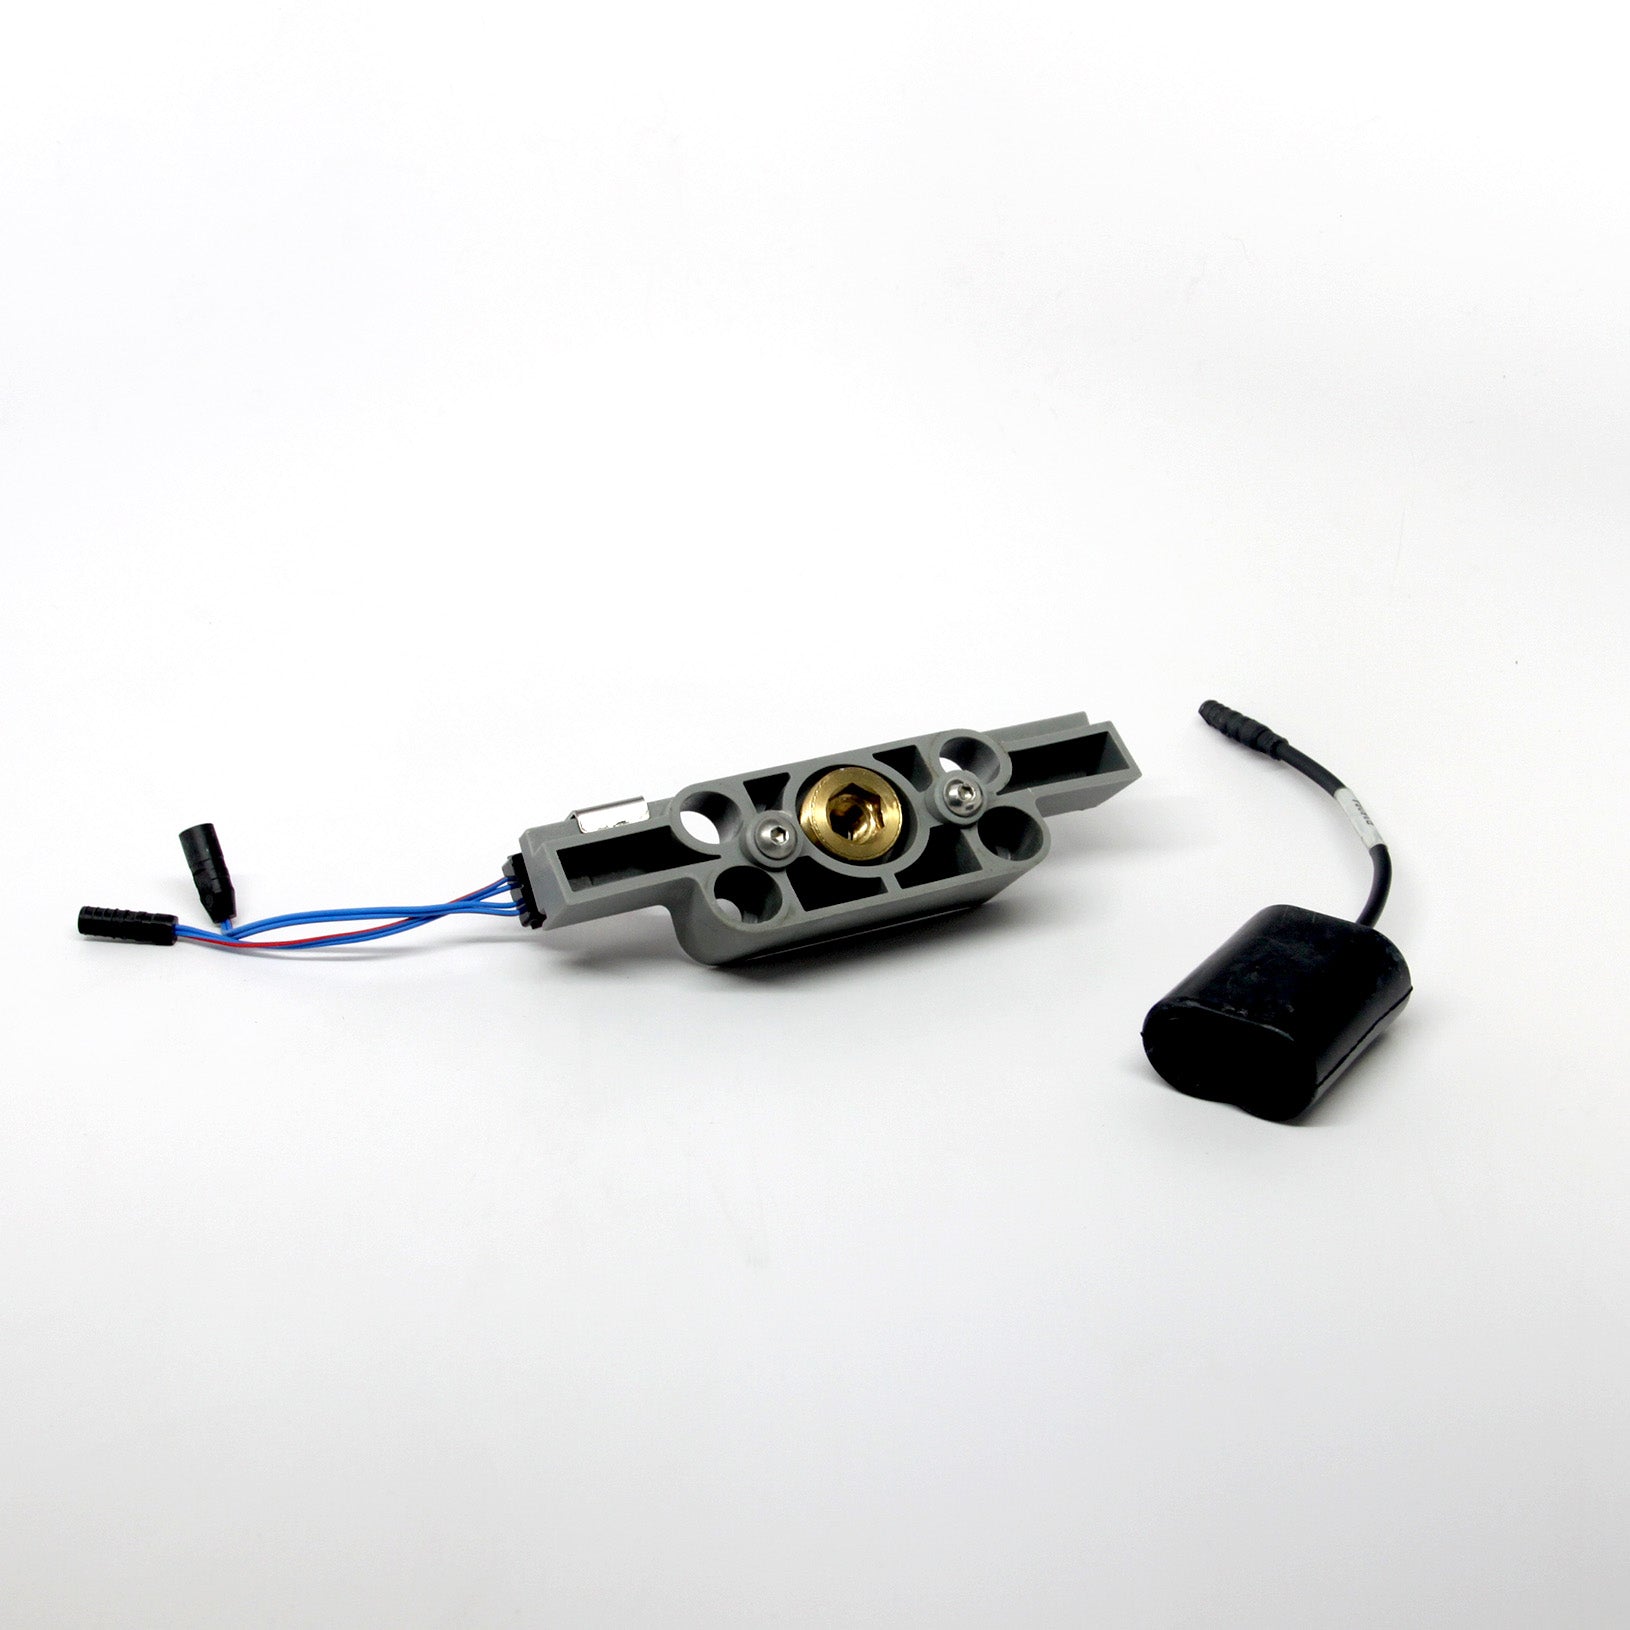 SFCAS - Nozzle and Sensor Assembly for Sanifount. Solidwave and Saniwave Intersan/AquaDesign